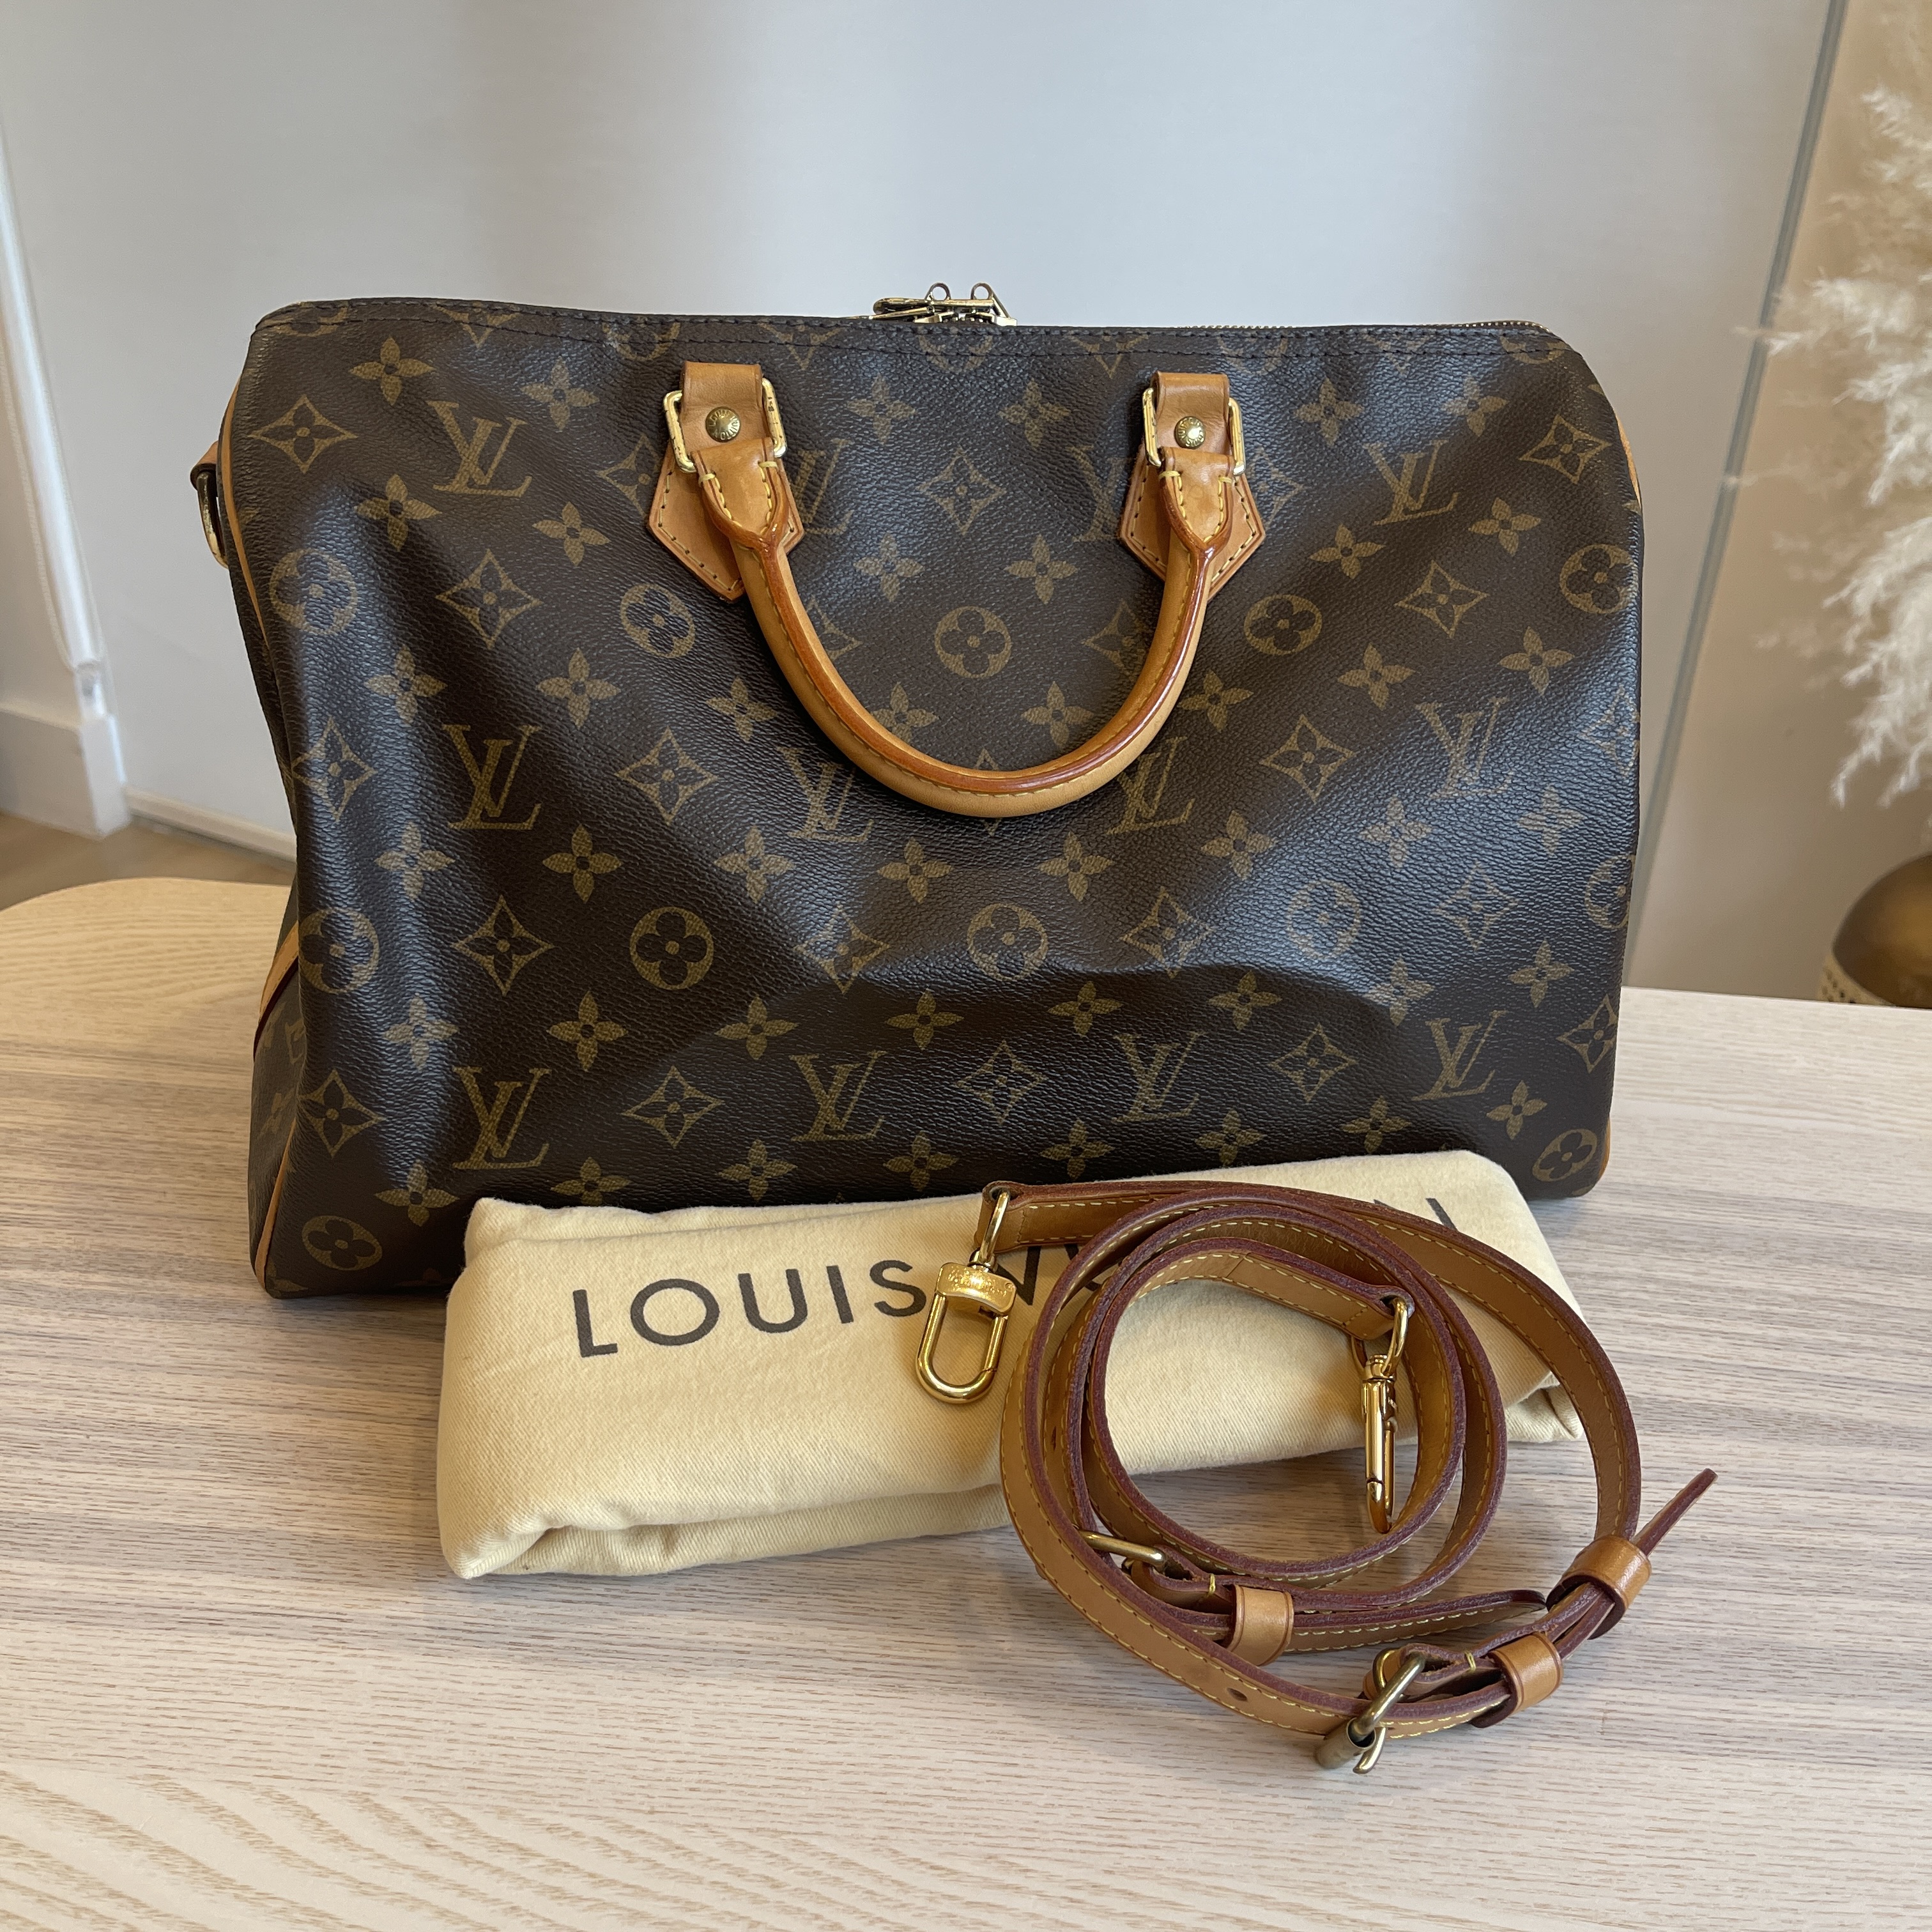 louisvuittonspeedy35 LOUIS VUITTON SPEEDY 35 Bandouliere' monogram Retails  $1960 Our price $1700 Excellent condition Comes with the…